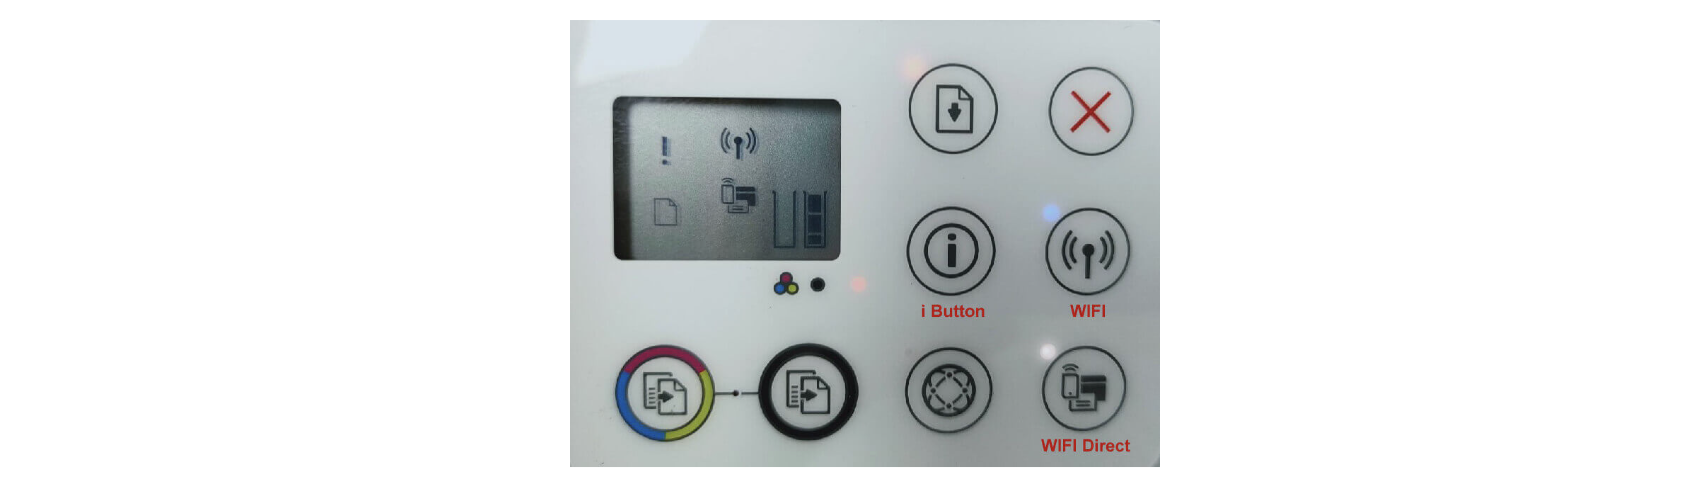 Wi-Fi buttons